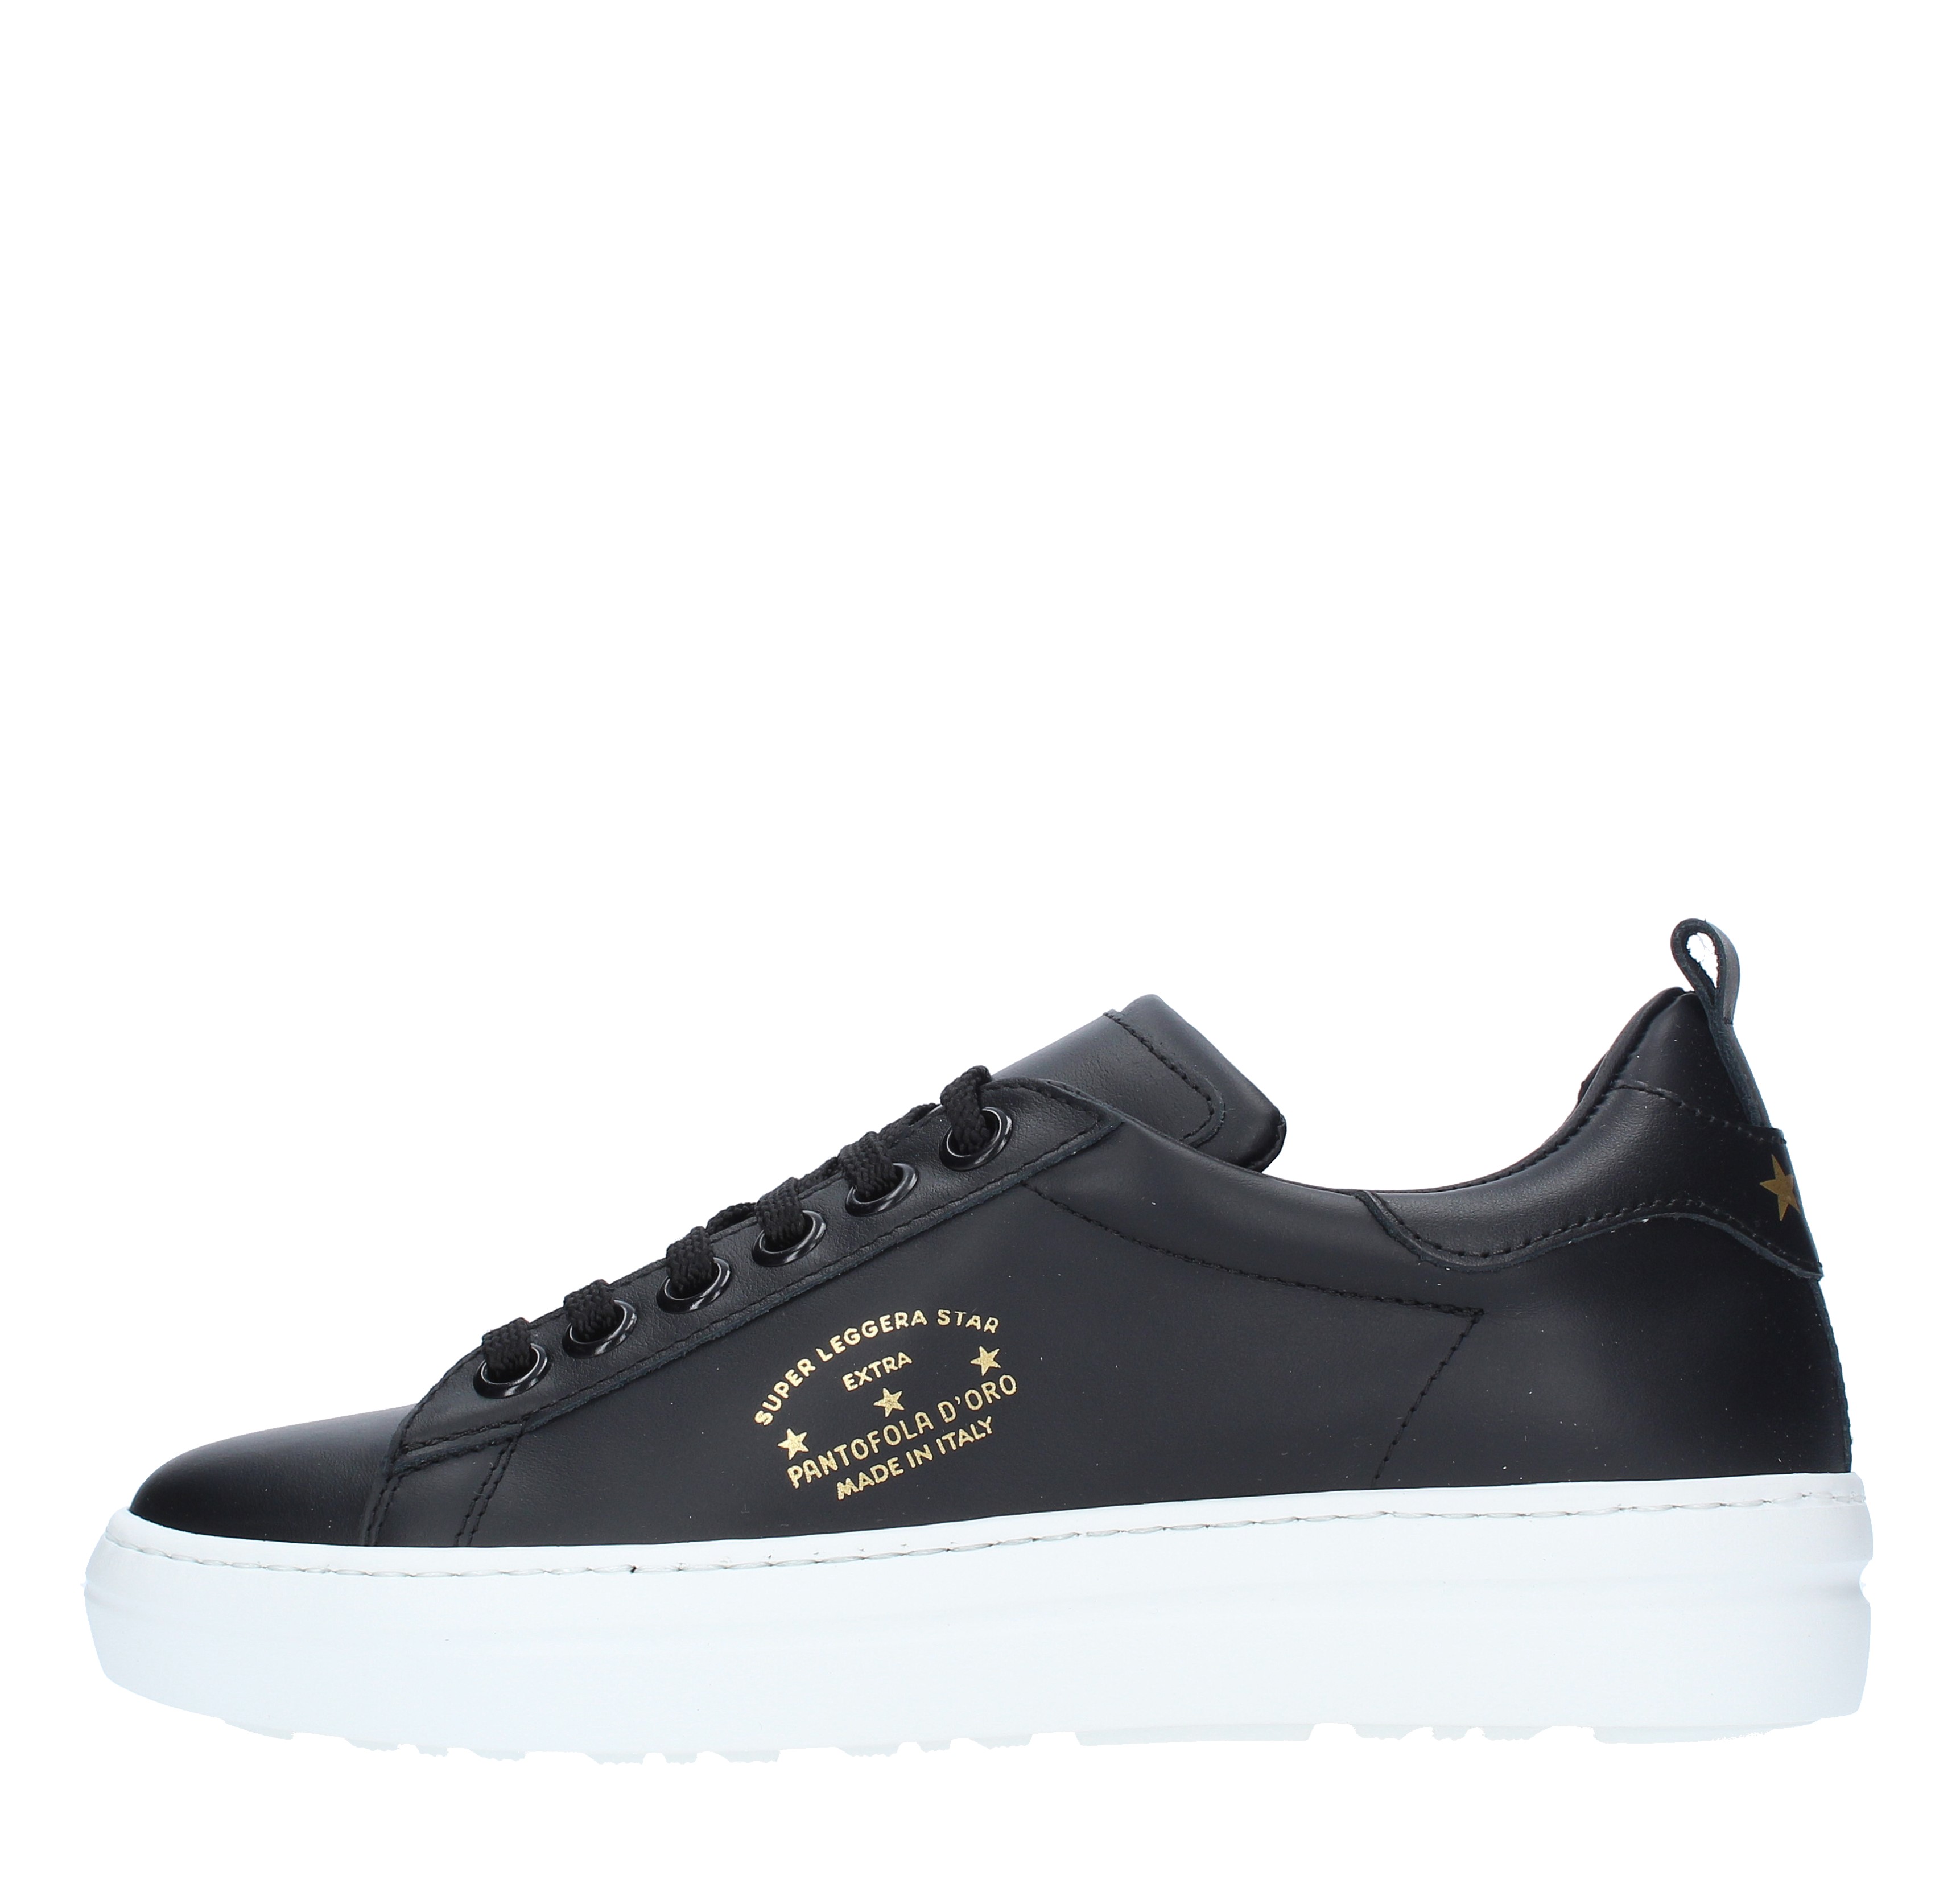 Sneakers in pelle - PANTOFOLA D'ORO - Ginevra calzature